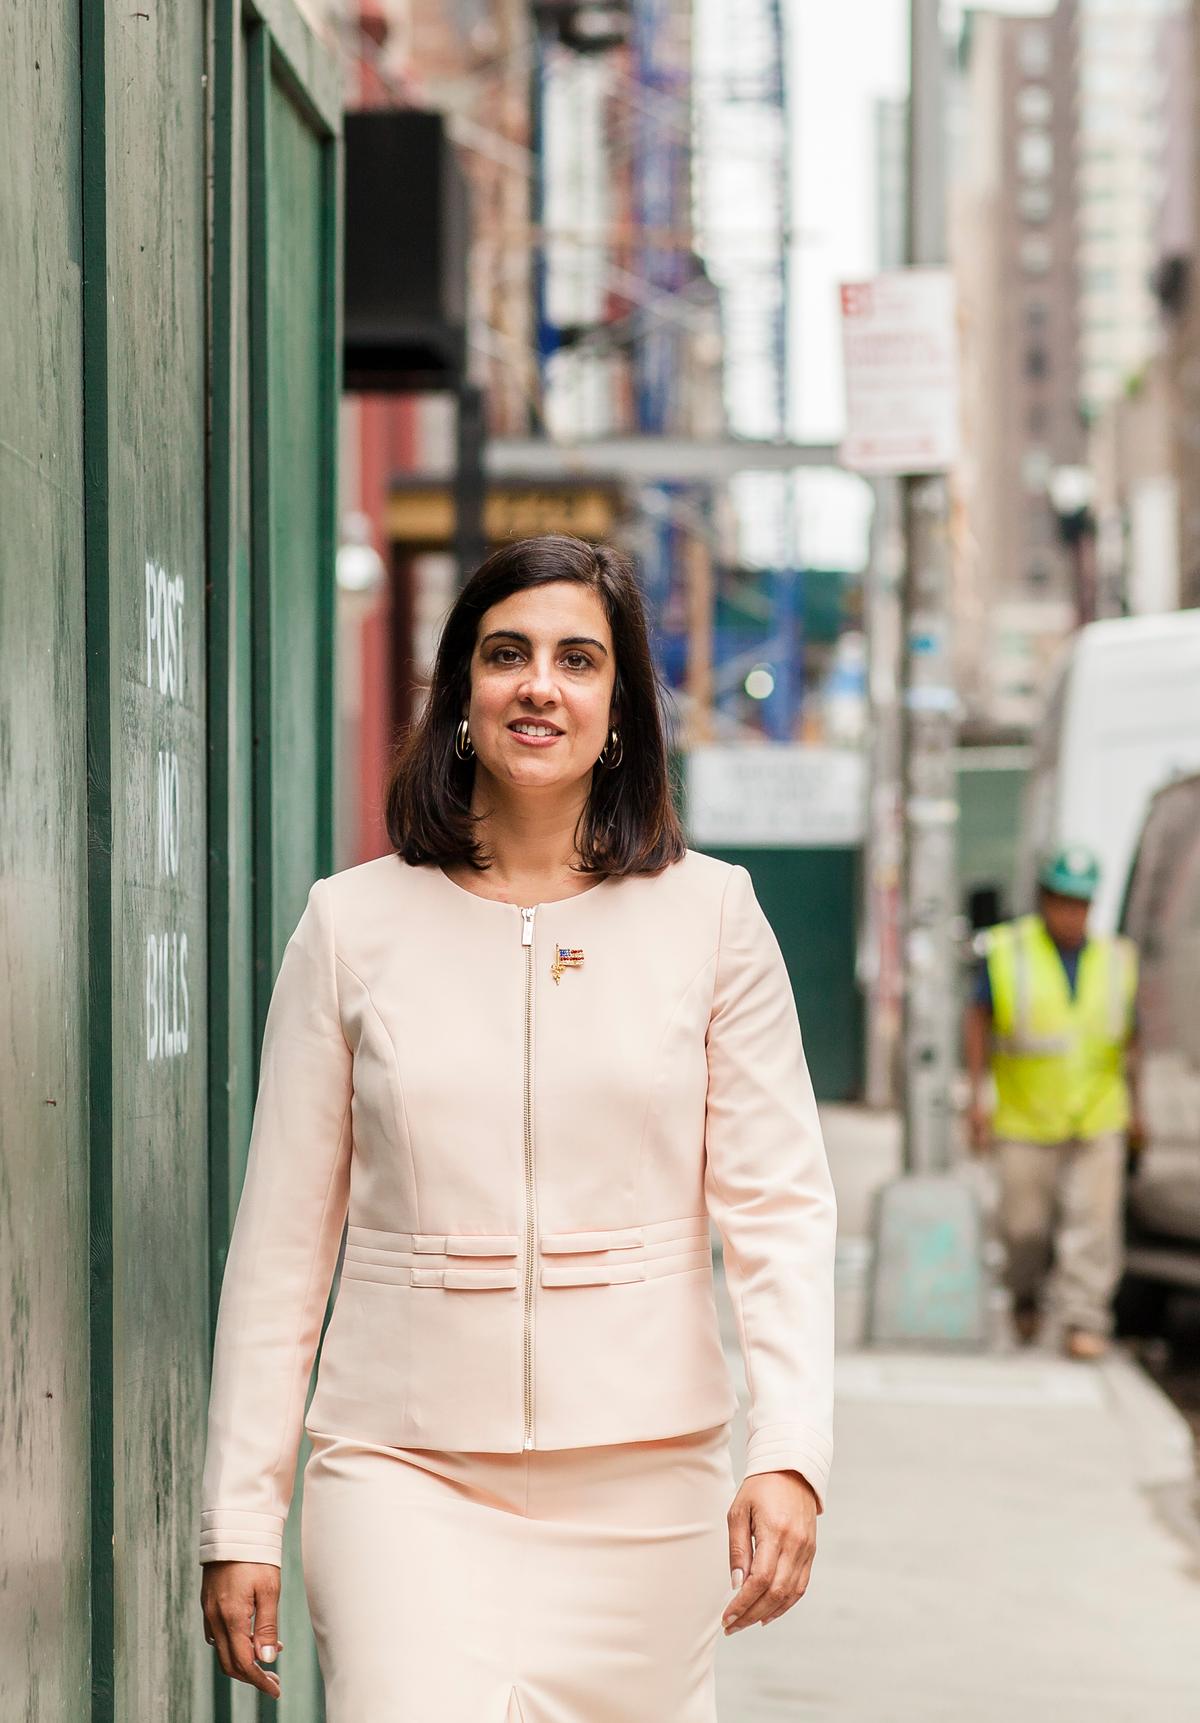 Republican mayoral candidate Nicole Malliotakis, in New York on July 27, 2017. (Samira Bouaou/The Epoch Times)